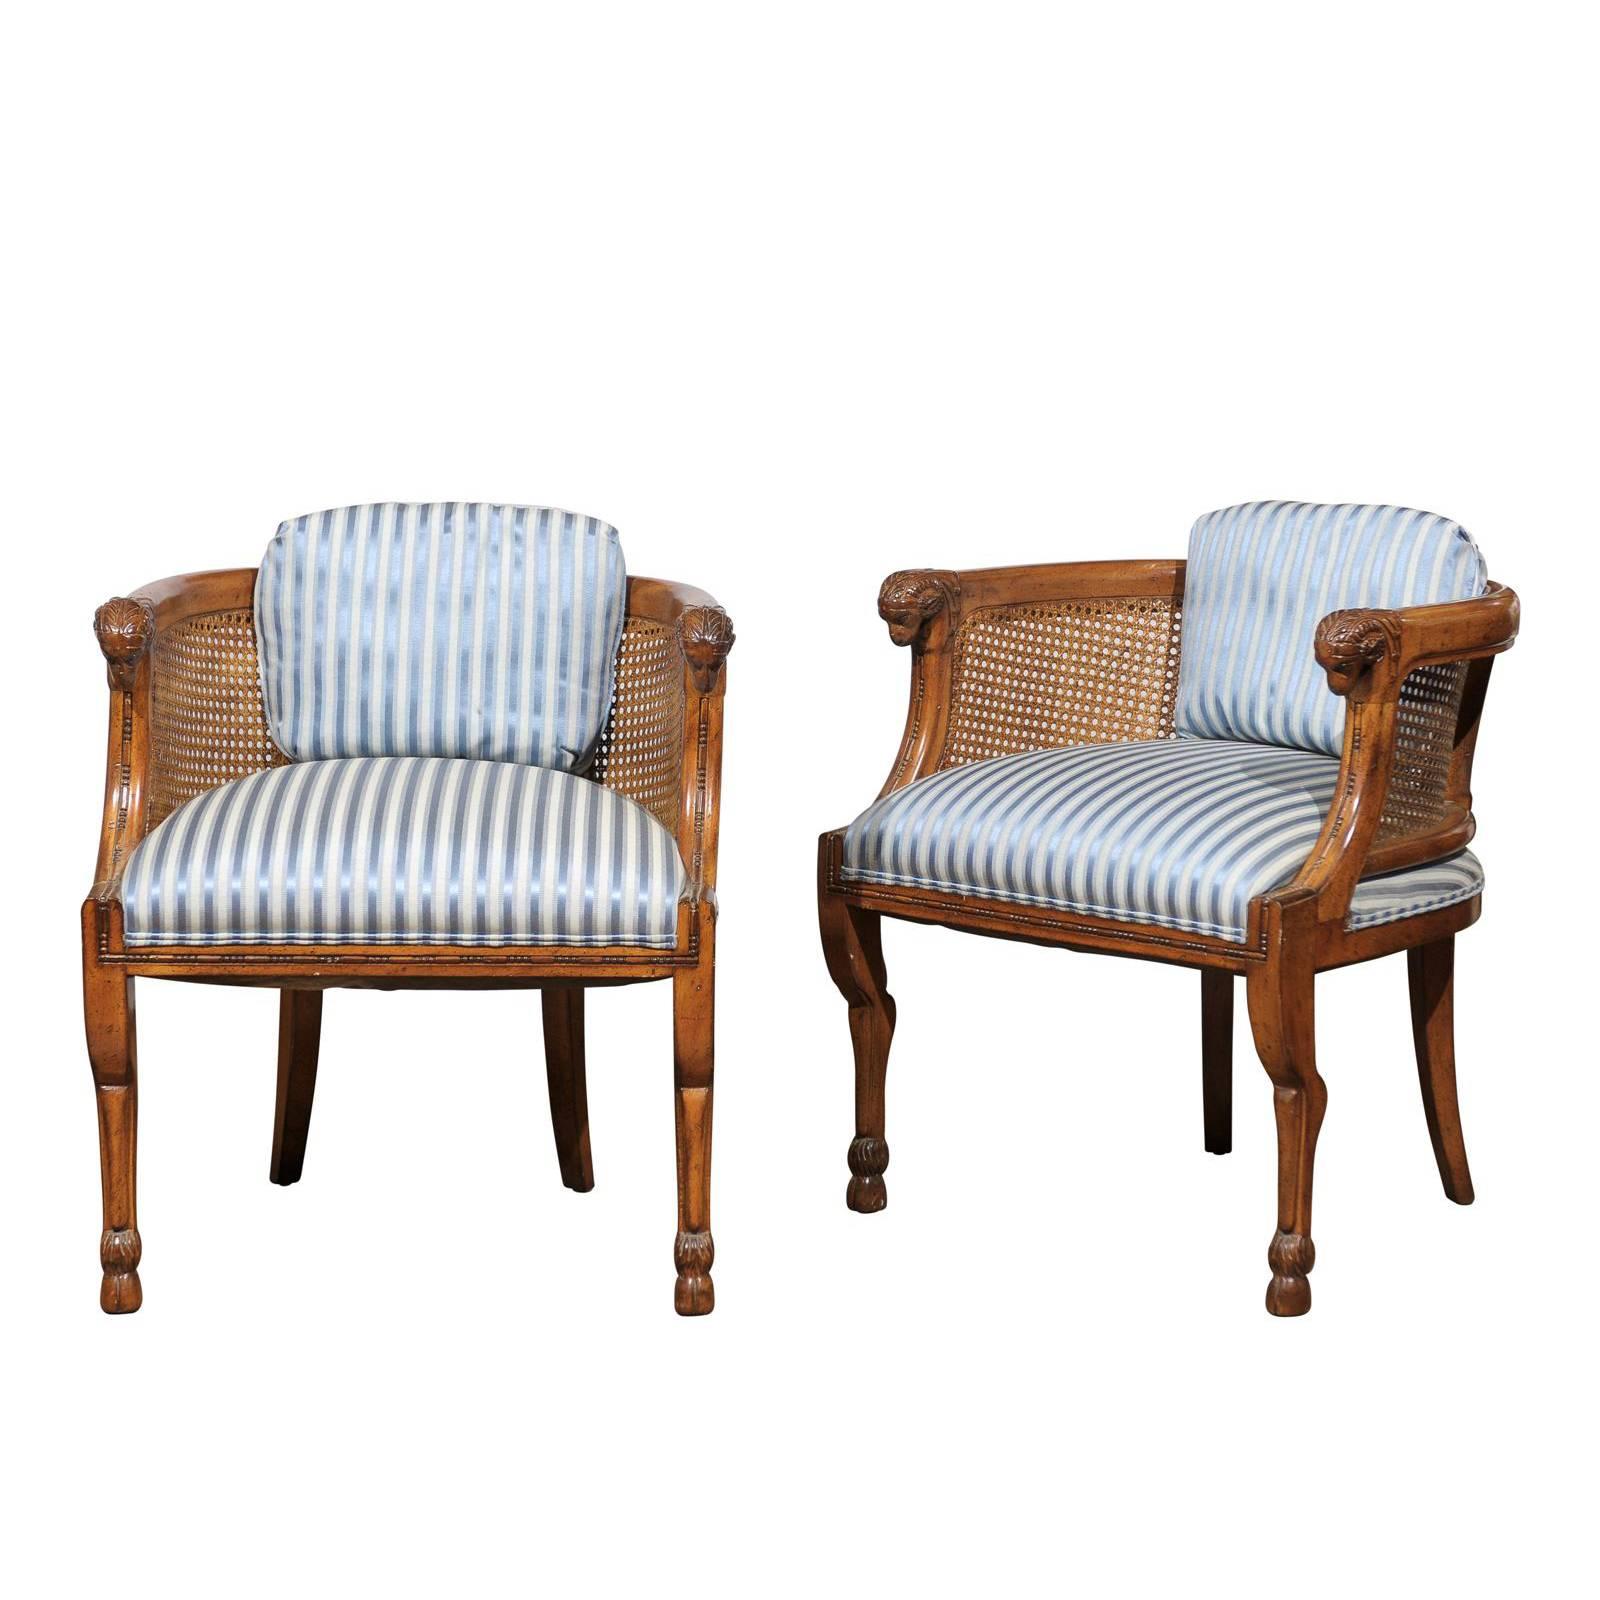 Pair of Regency Style Cane and Walnut Club Chairs by Tomlinson